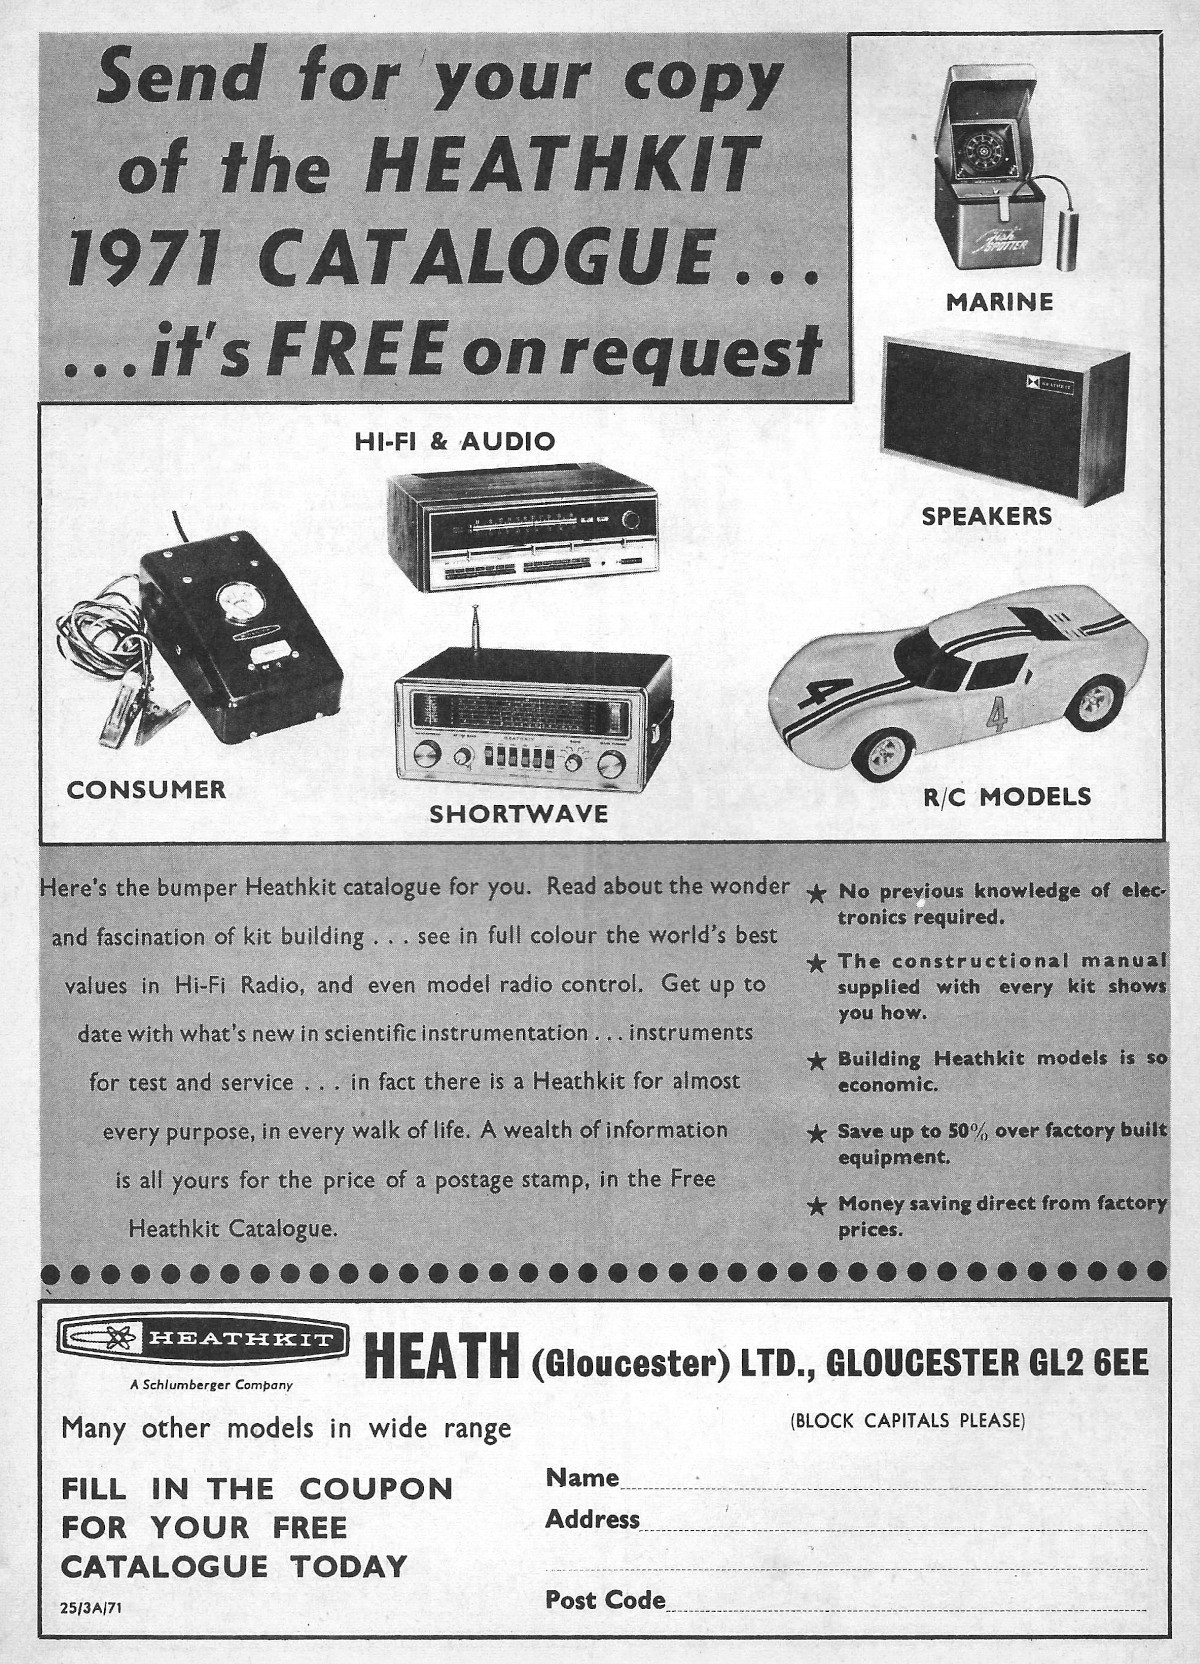 Some of Heathkit's more consumer-oriented kits.  From Practical Electronics, March 1971